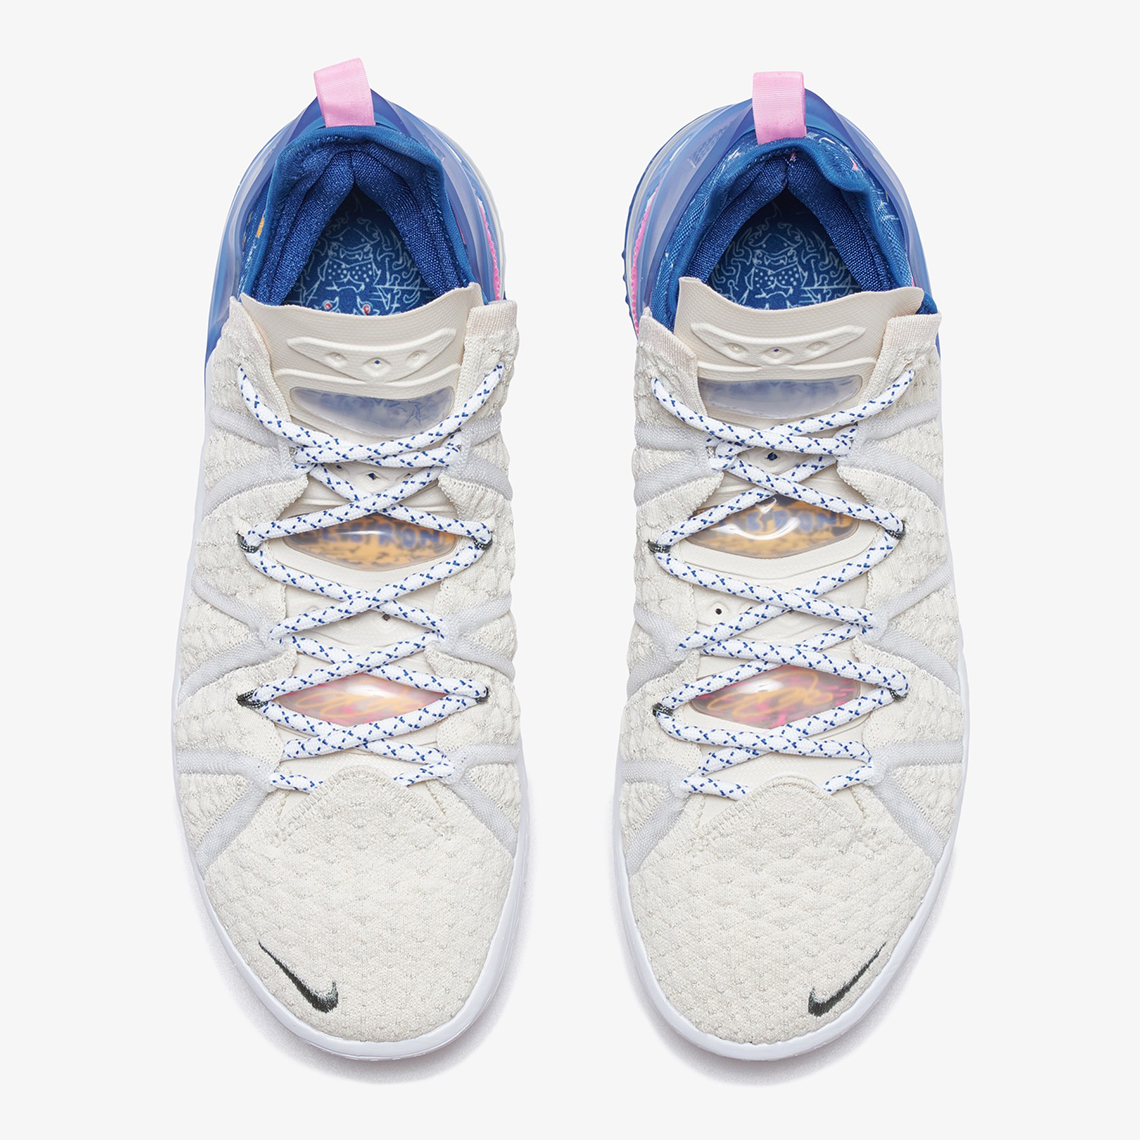 Nike Lebron 18 Light Cream Pink Glow Game Royal Db8148 200 Los Angeles By Day 1